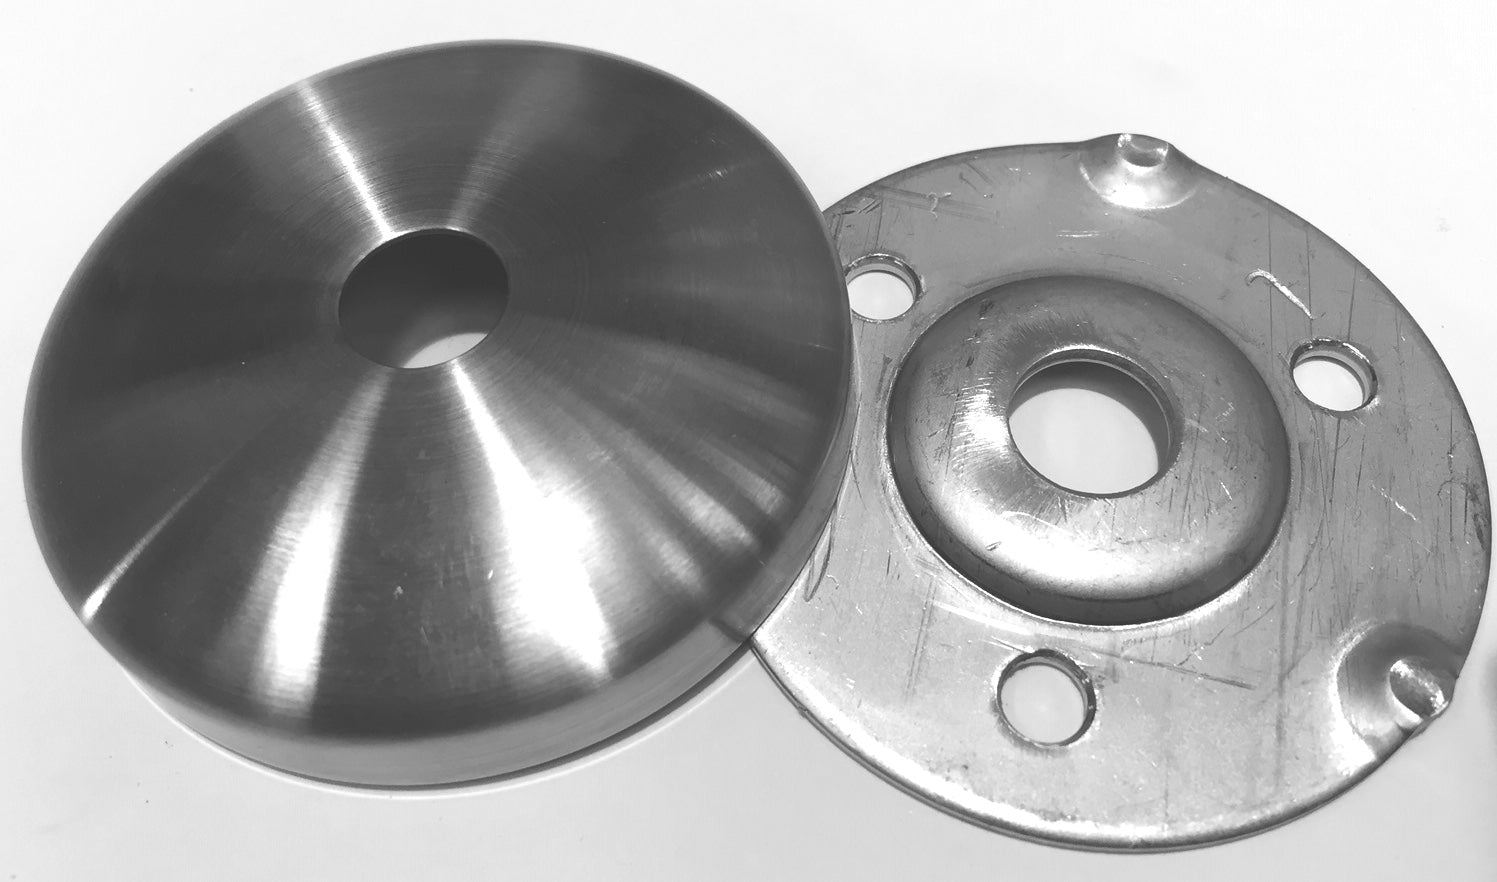 Welded base and cover to suit 12mm round, Satin Finish